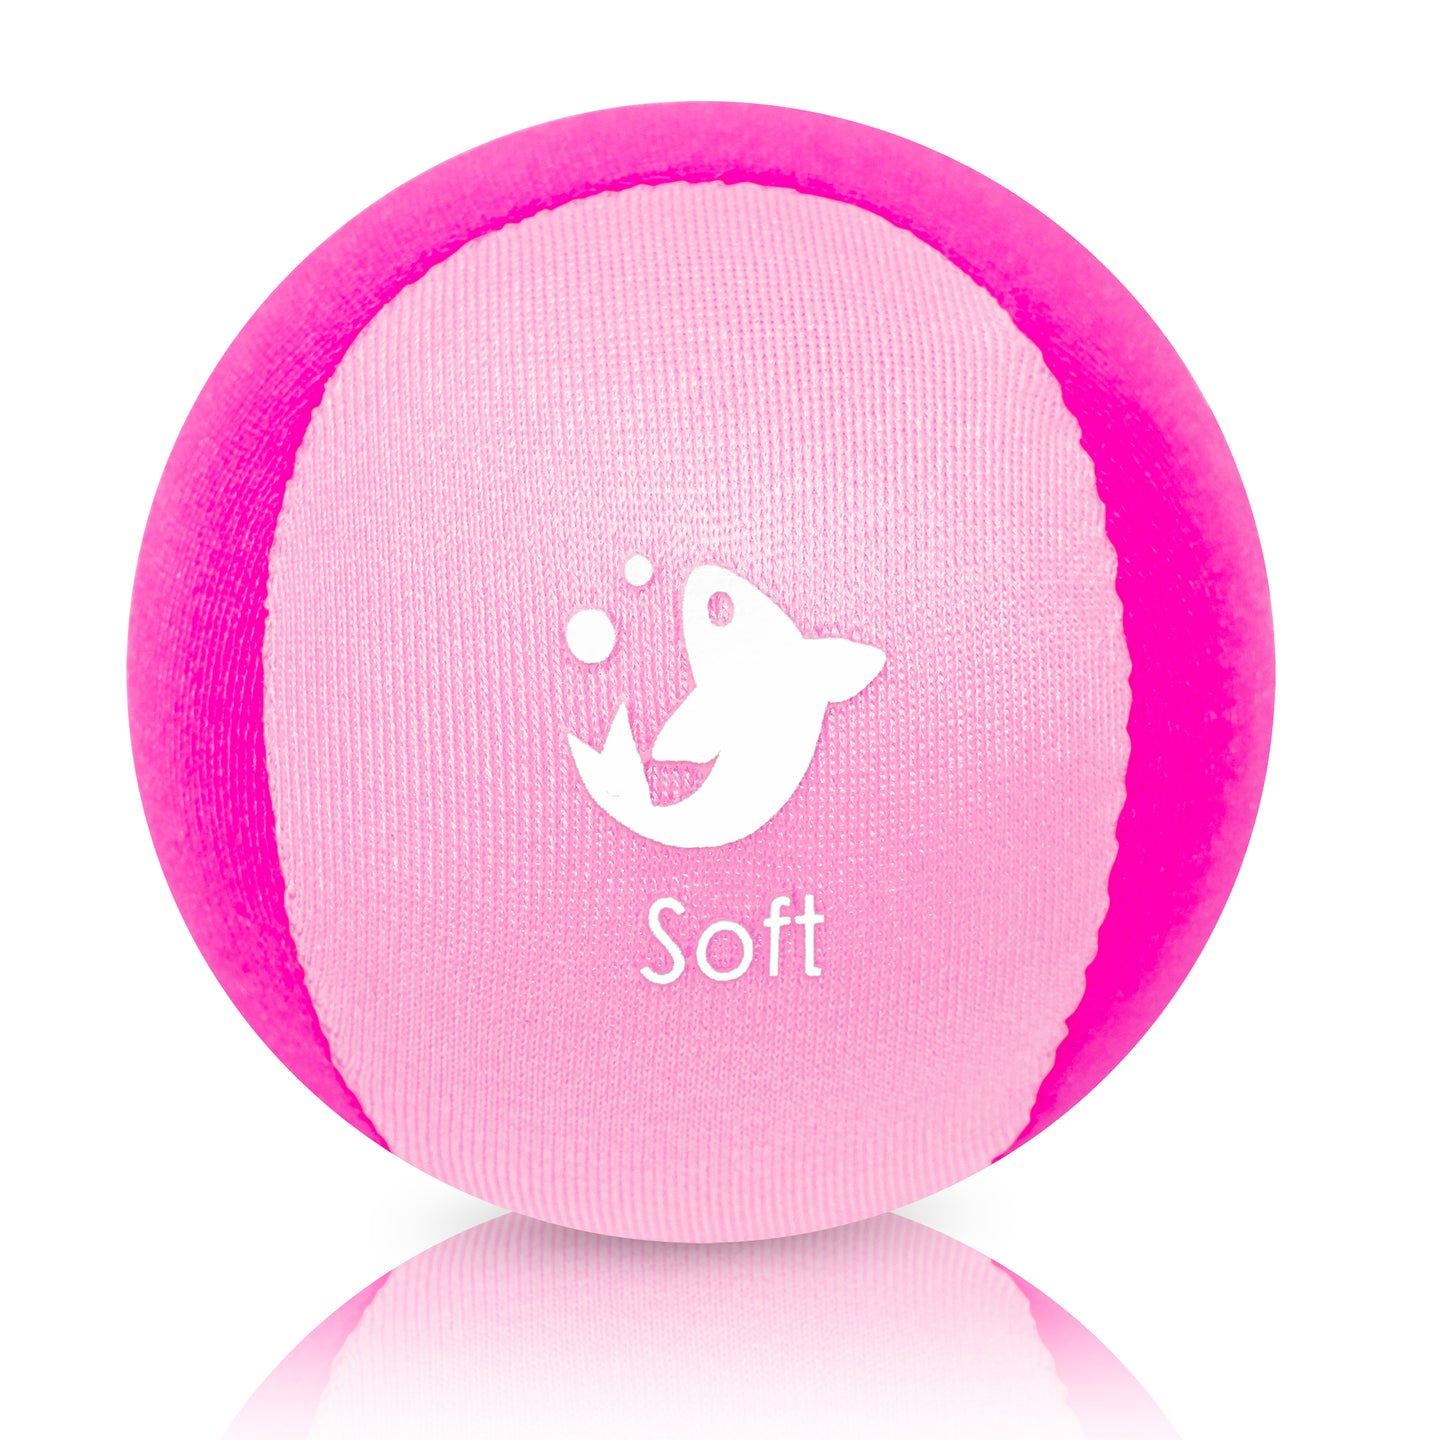 Serenilite Stress Balls Anxiety Relief Items Grip Strength Trainer  Meditation Back / Lumbar Support - Buy Serenilite Stress Balls Anxiety  Relief Items Grip Strength Trainer Meditation Back / Lumbar Support Online  at